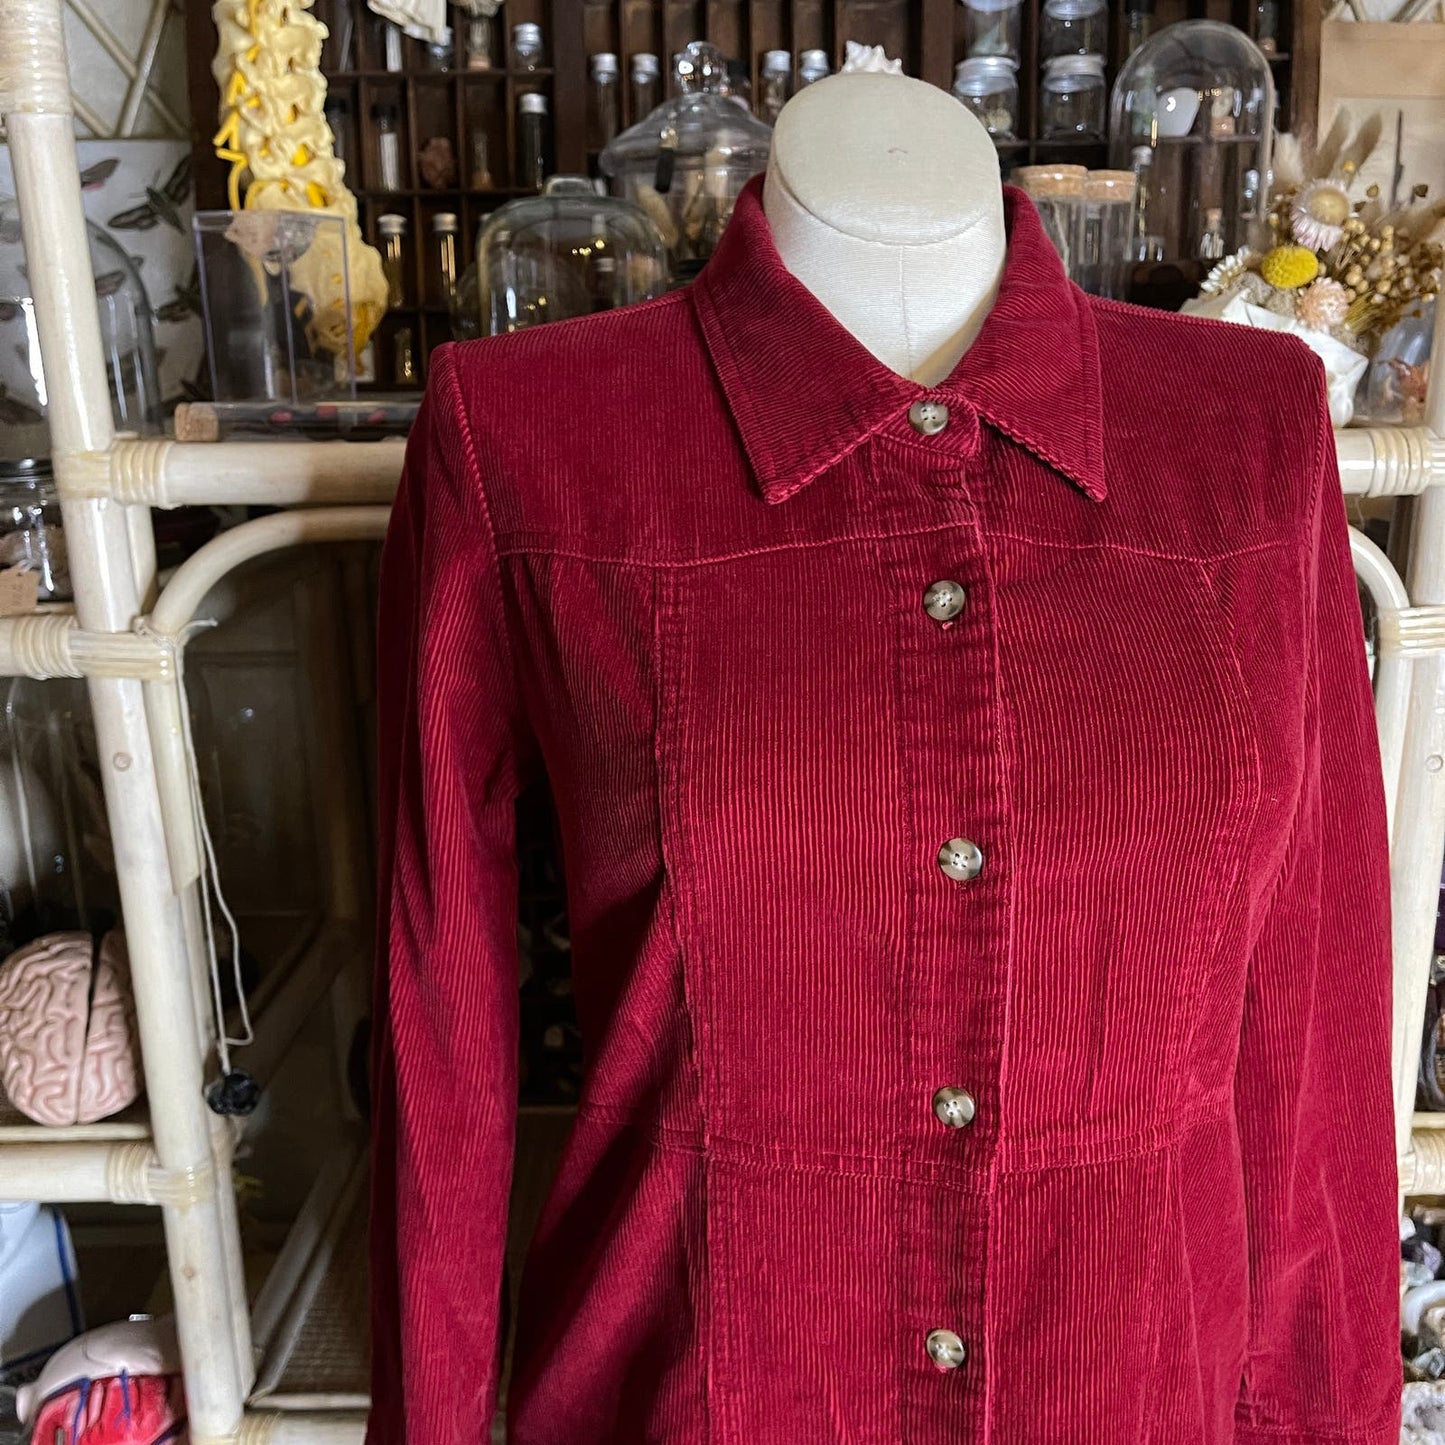 Vintage 90s Red Corduroy Dress Long Sleeves Button Front Midi Chelsea Studio 14P